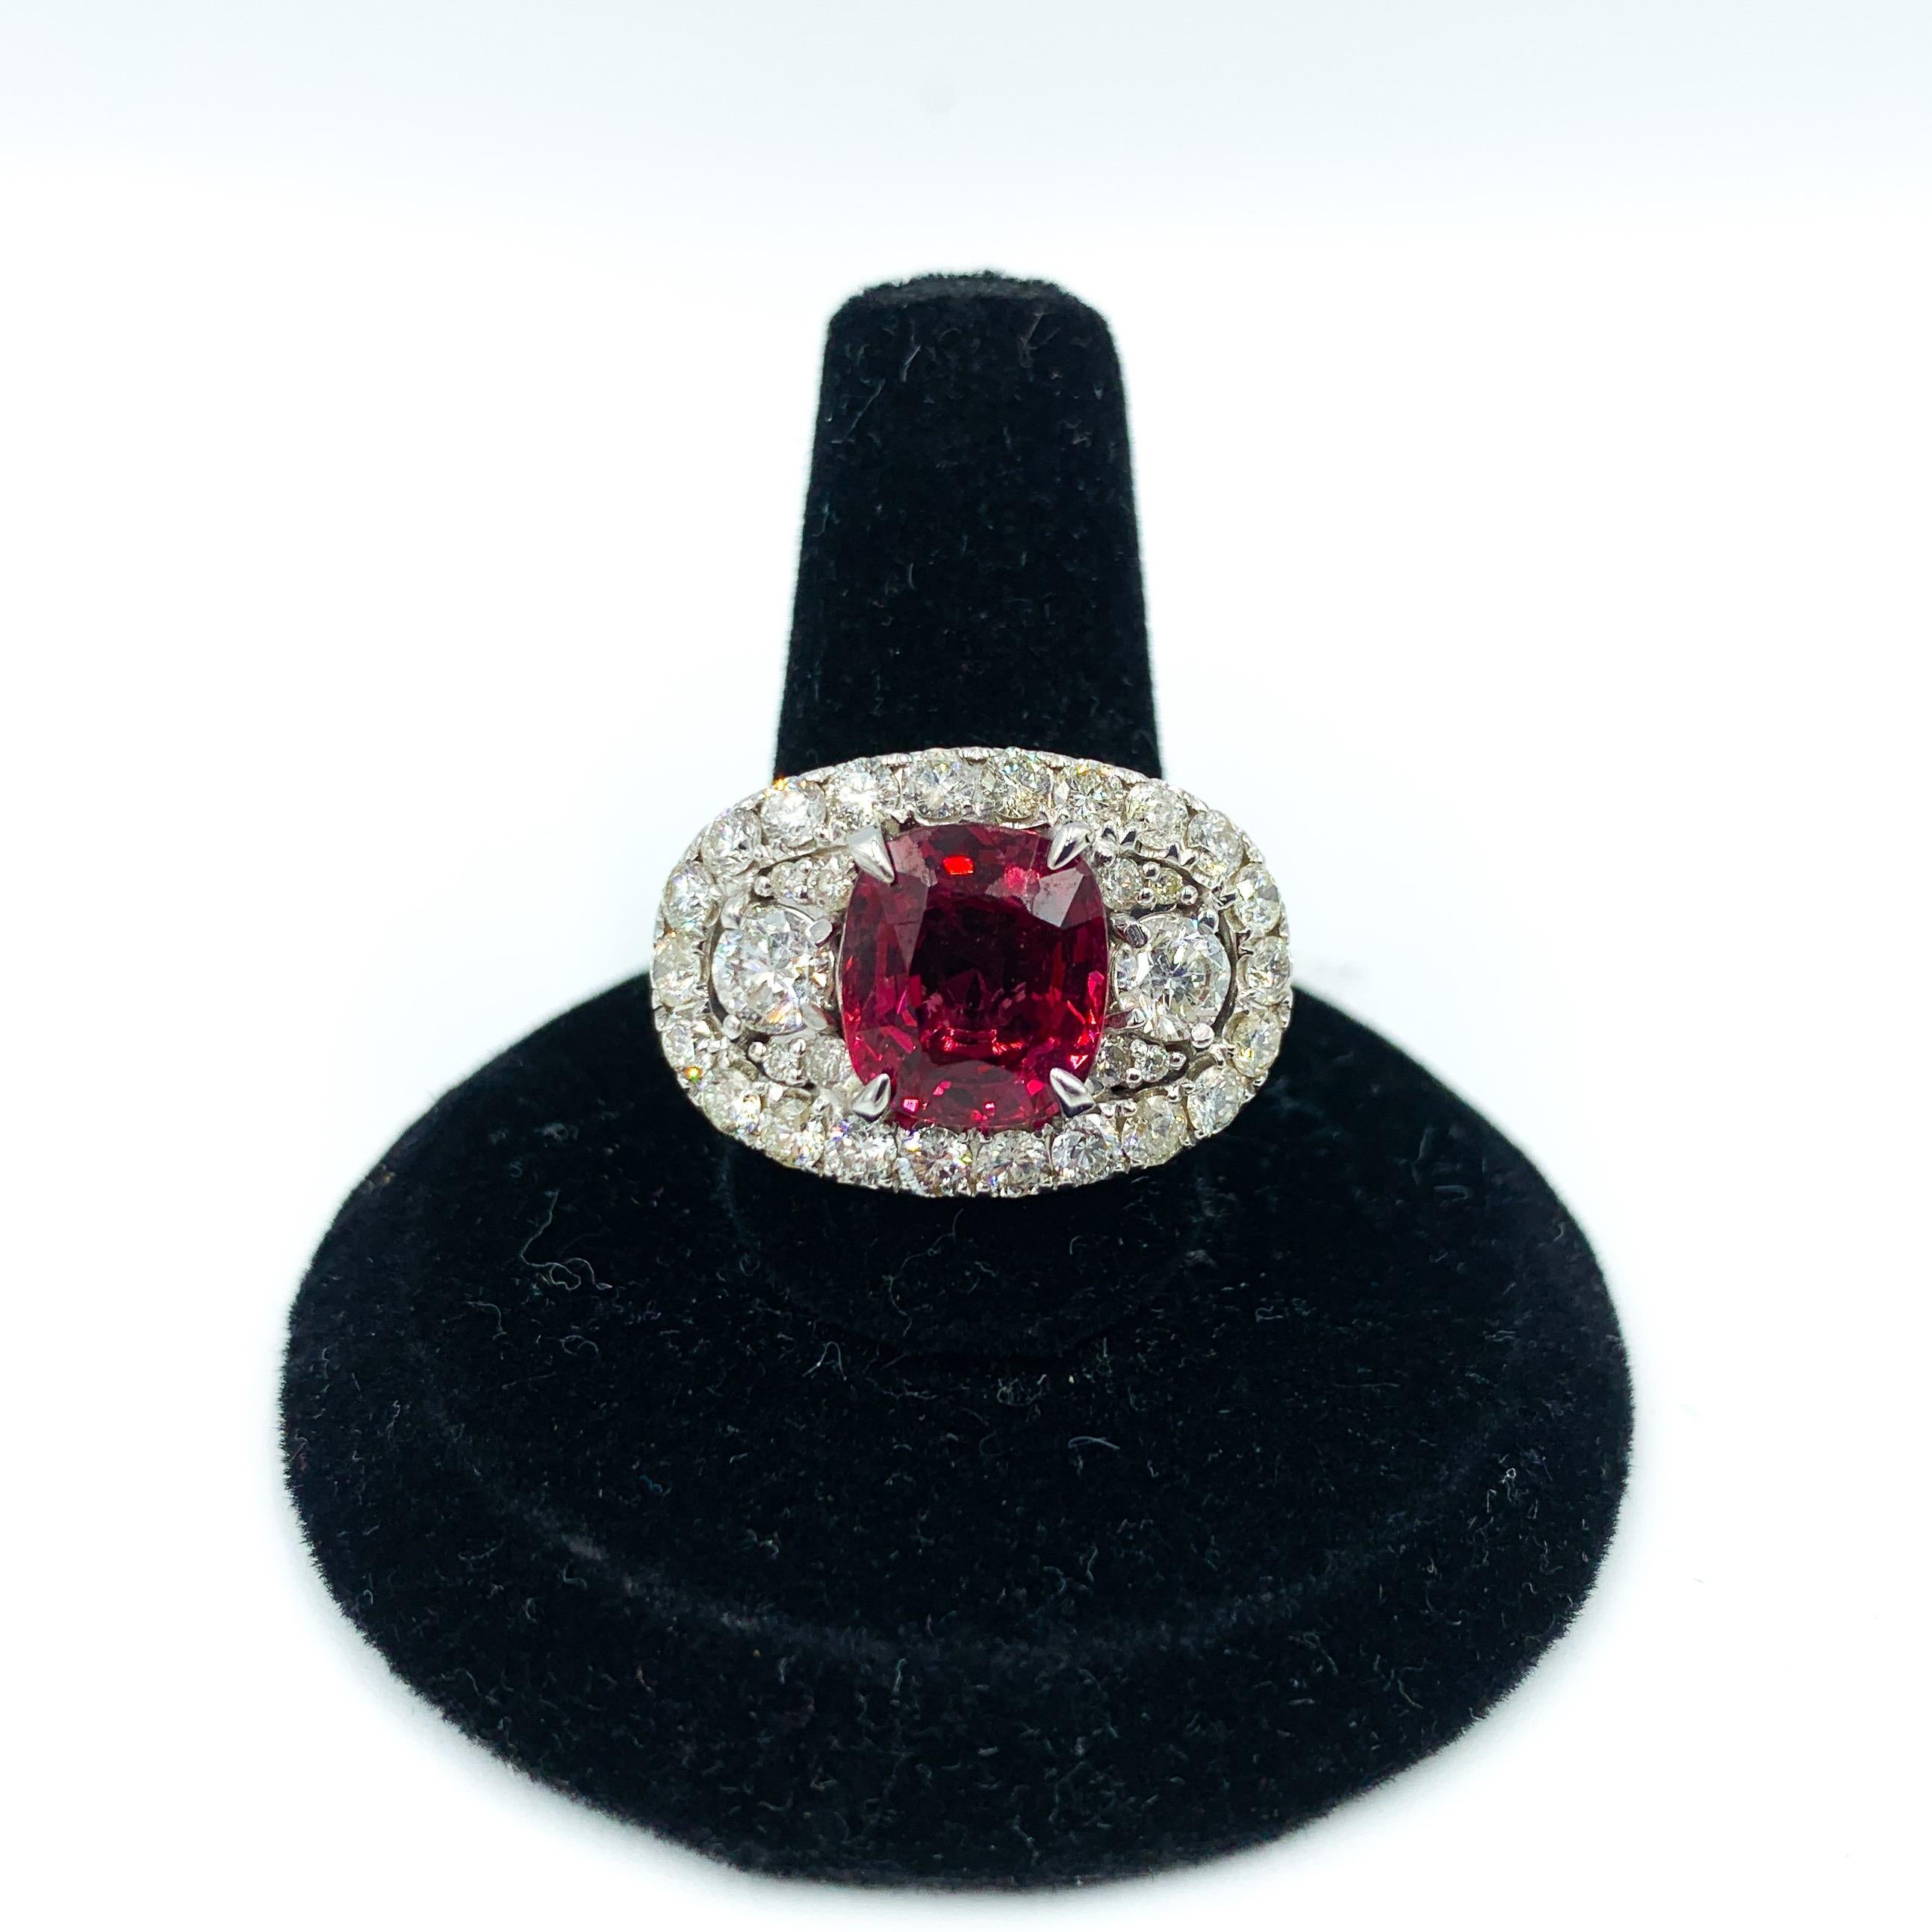 Cushion Cut 4.19 Carat Raspberry Red Spinel Ring